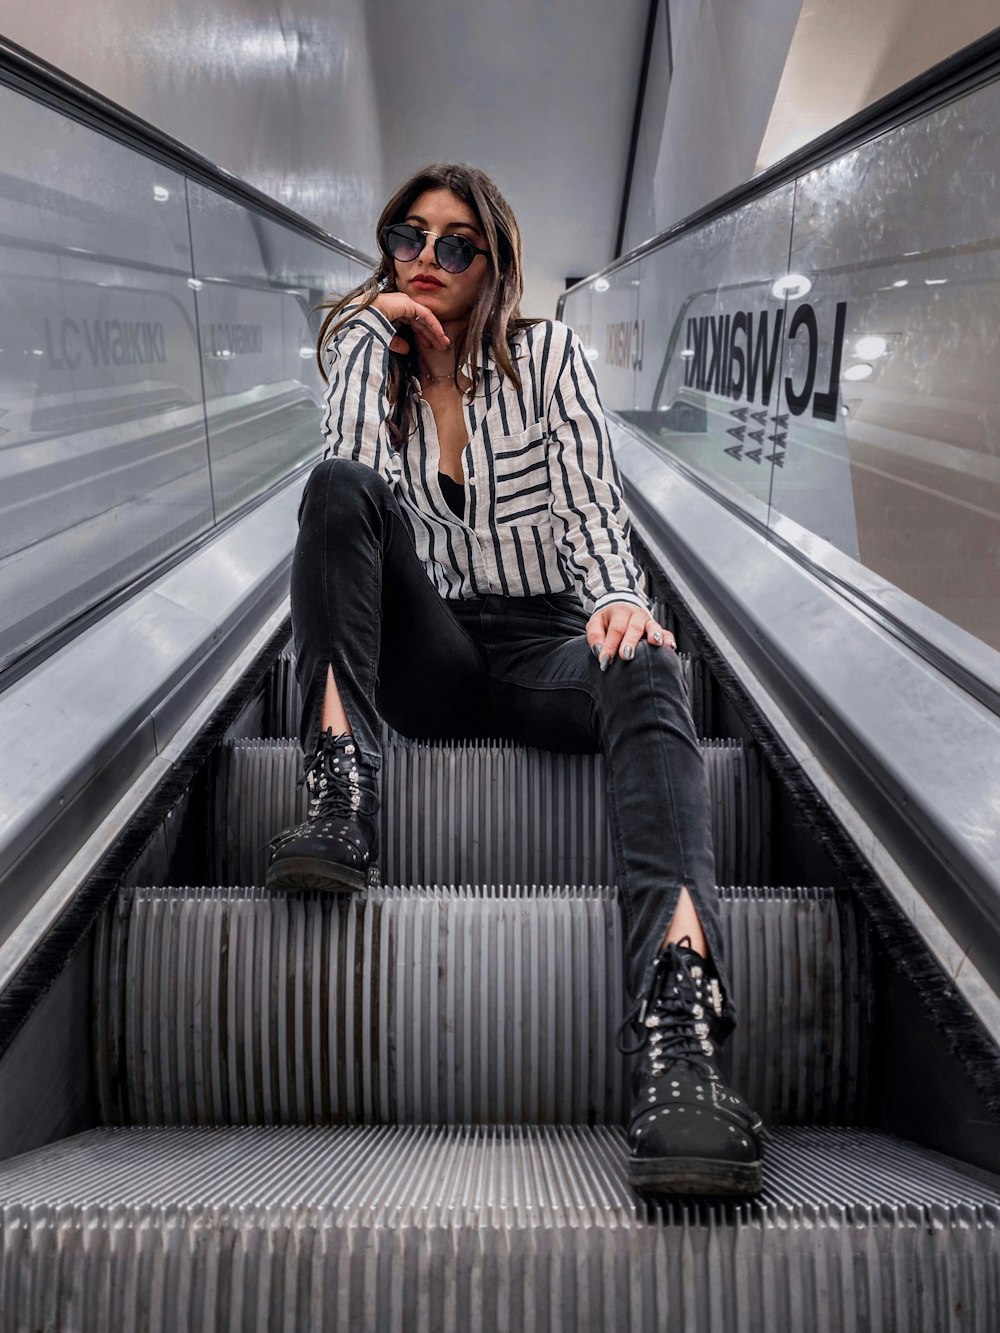 woman in black and white striped long sleeve shirt and black pants sitting on escalator